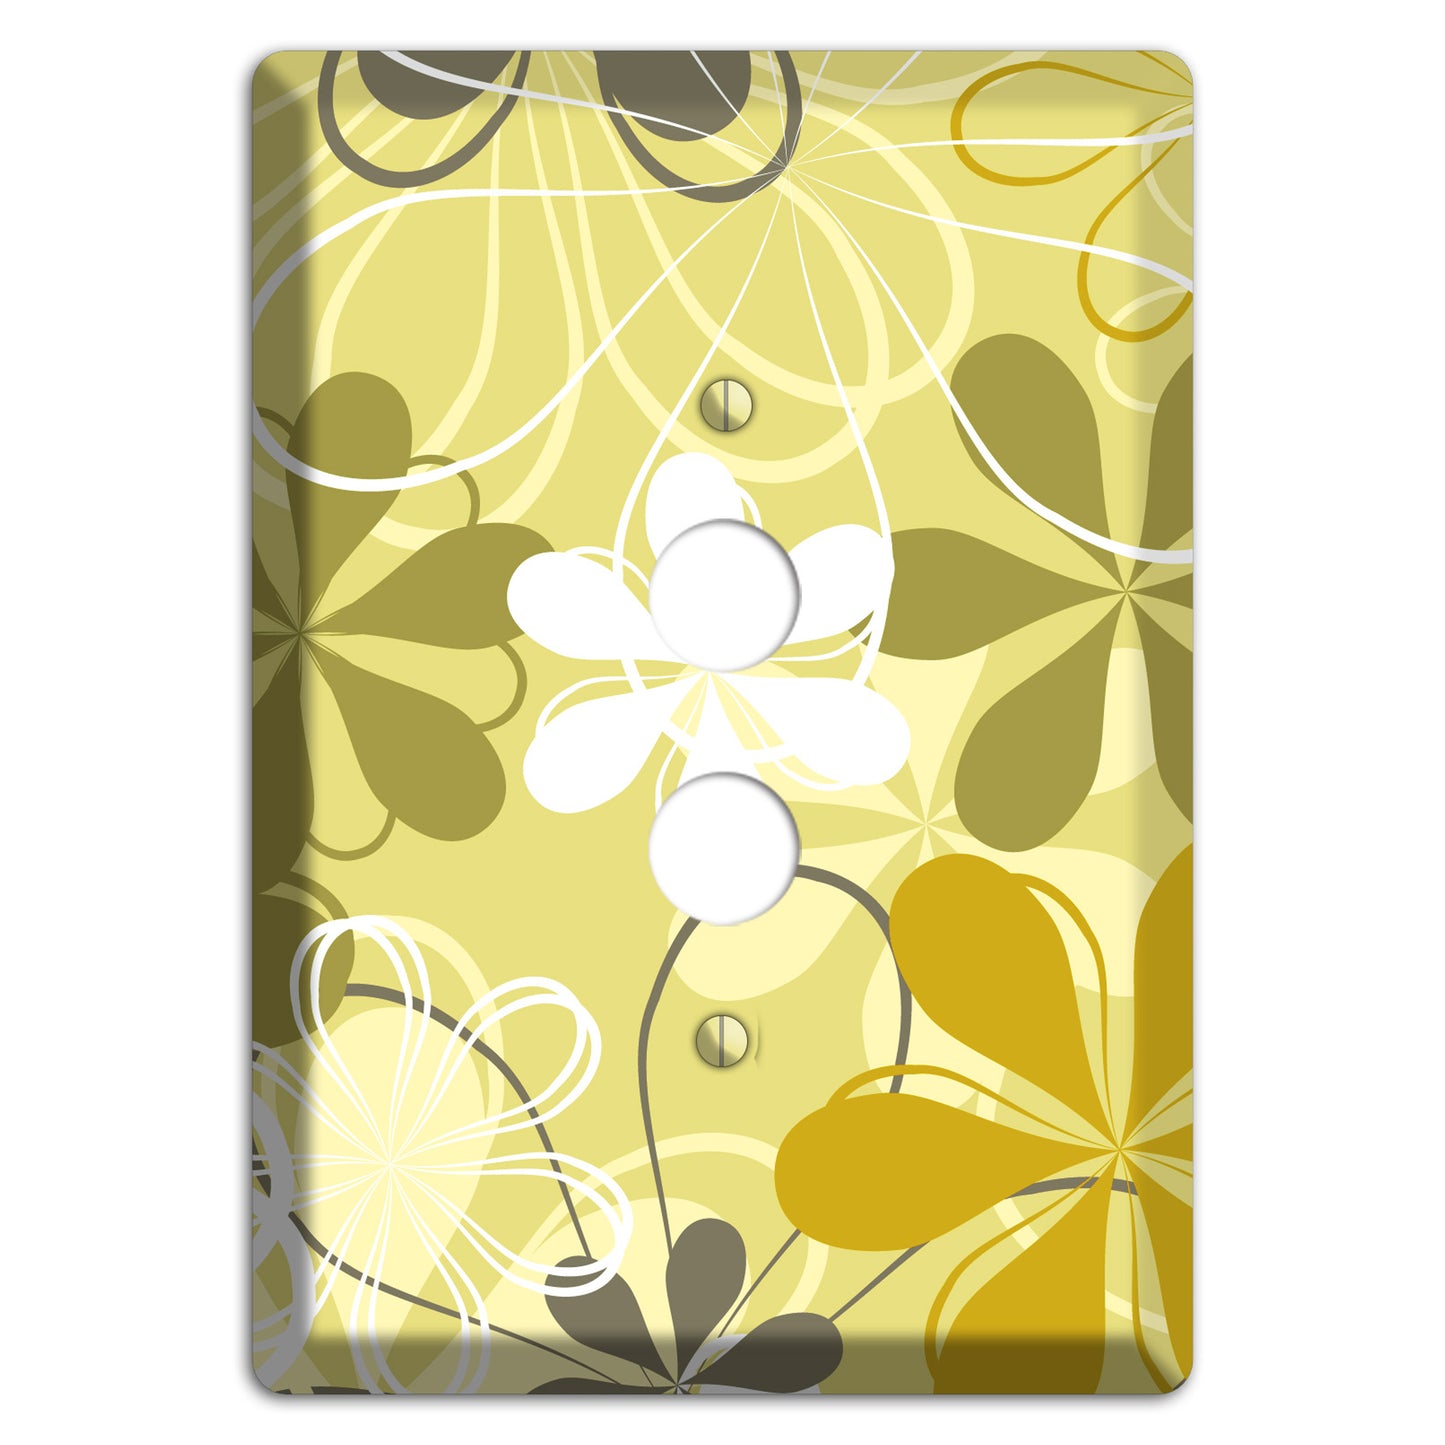 Olive Retro Flowers 1 Pushbutton Wallplate